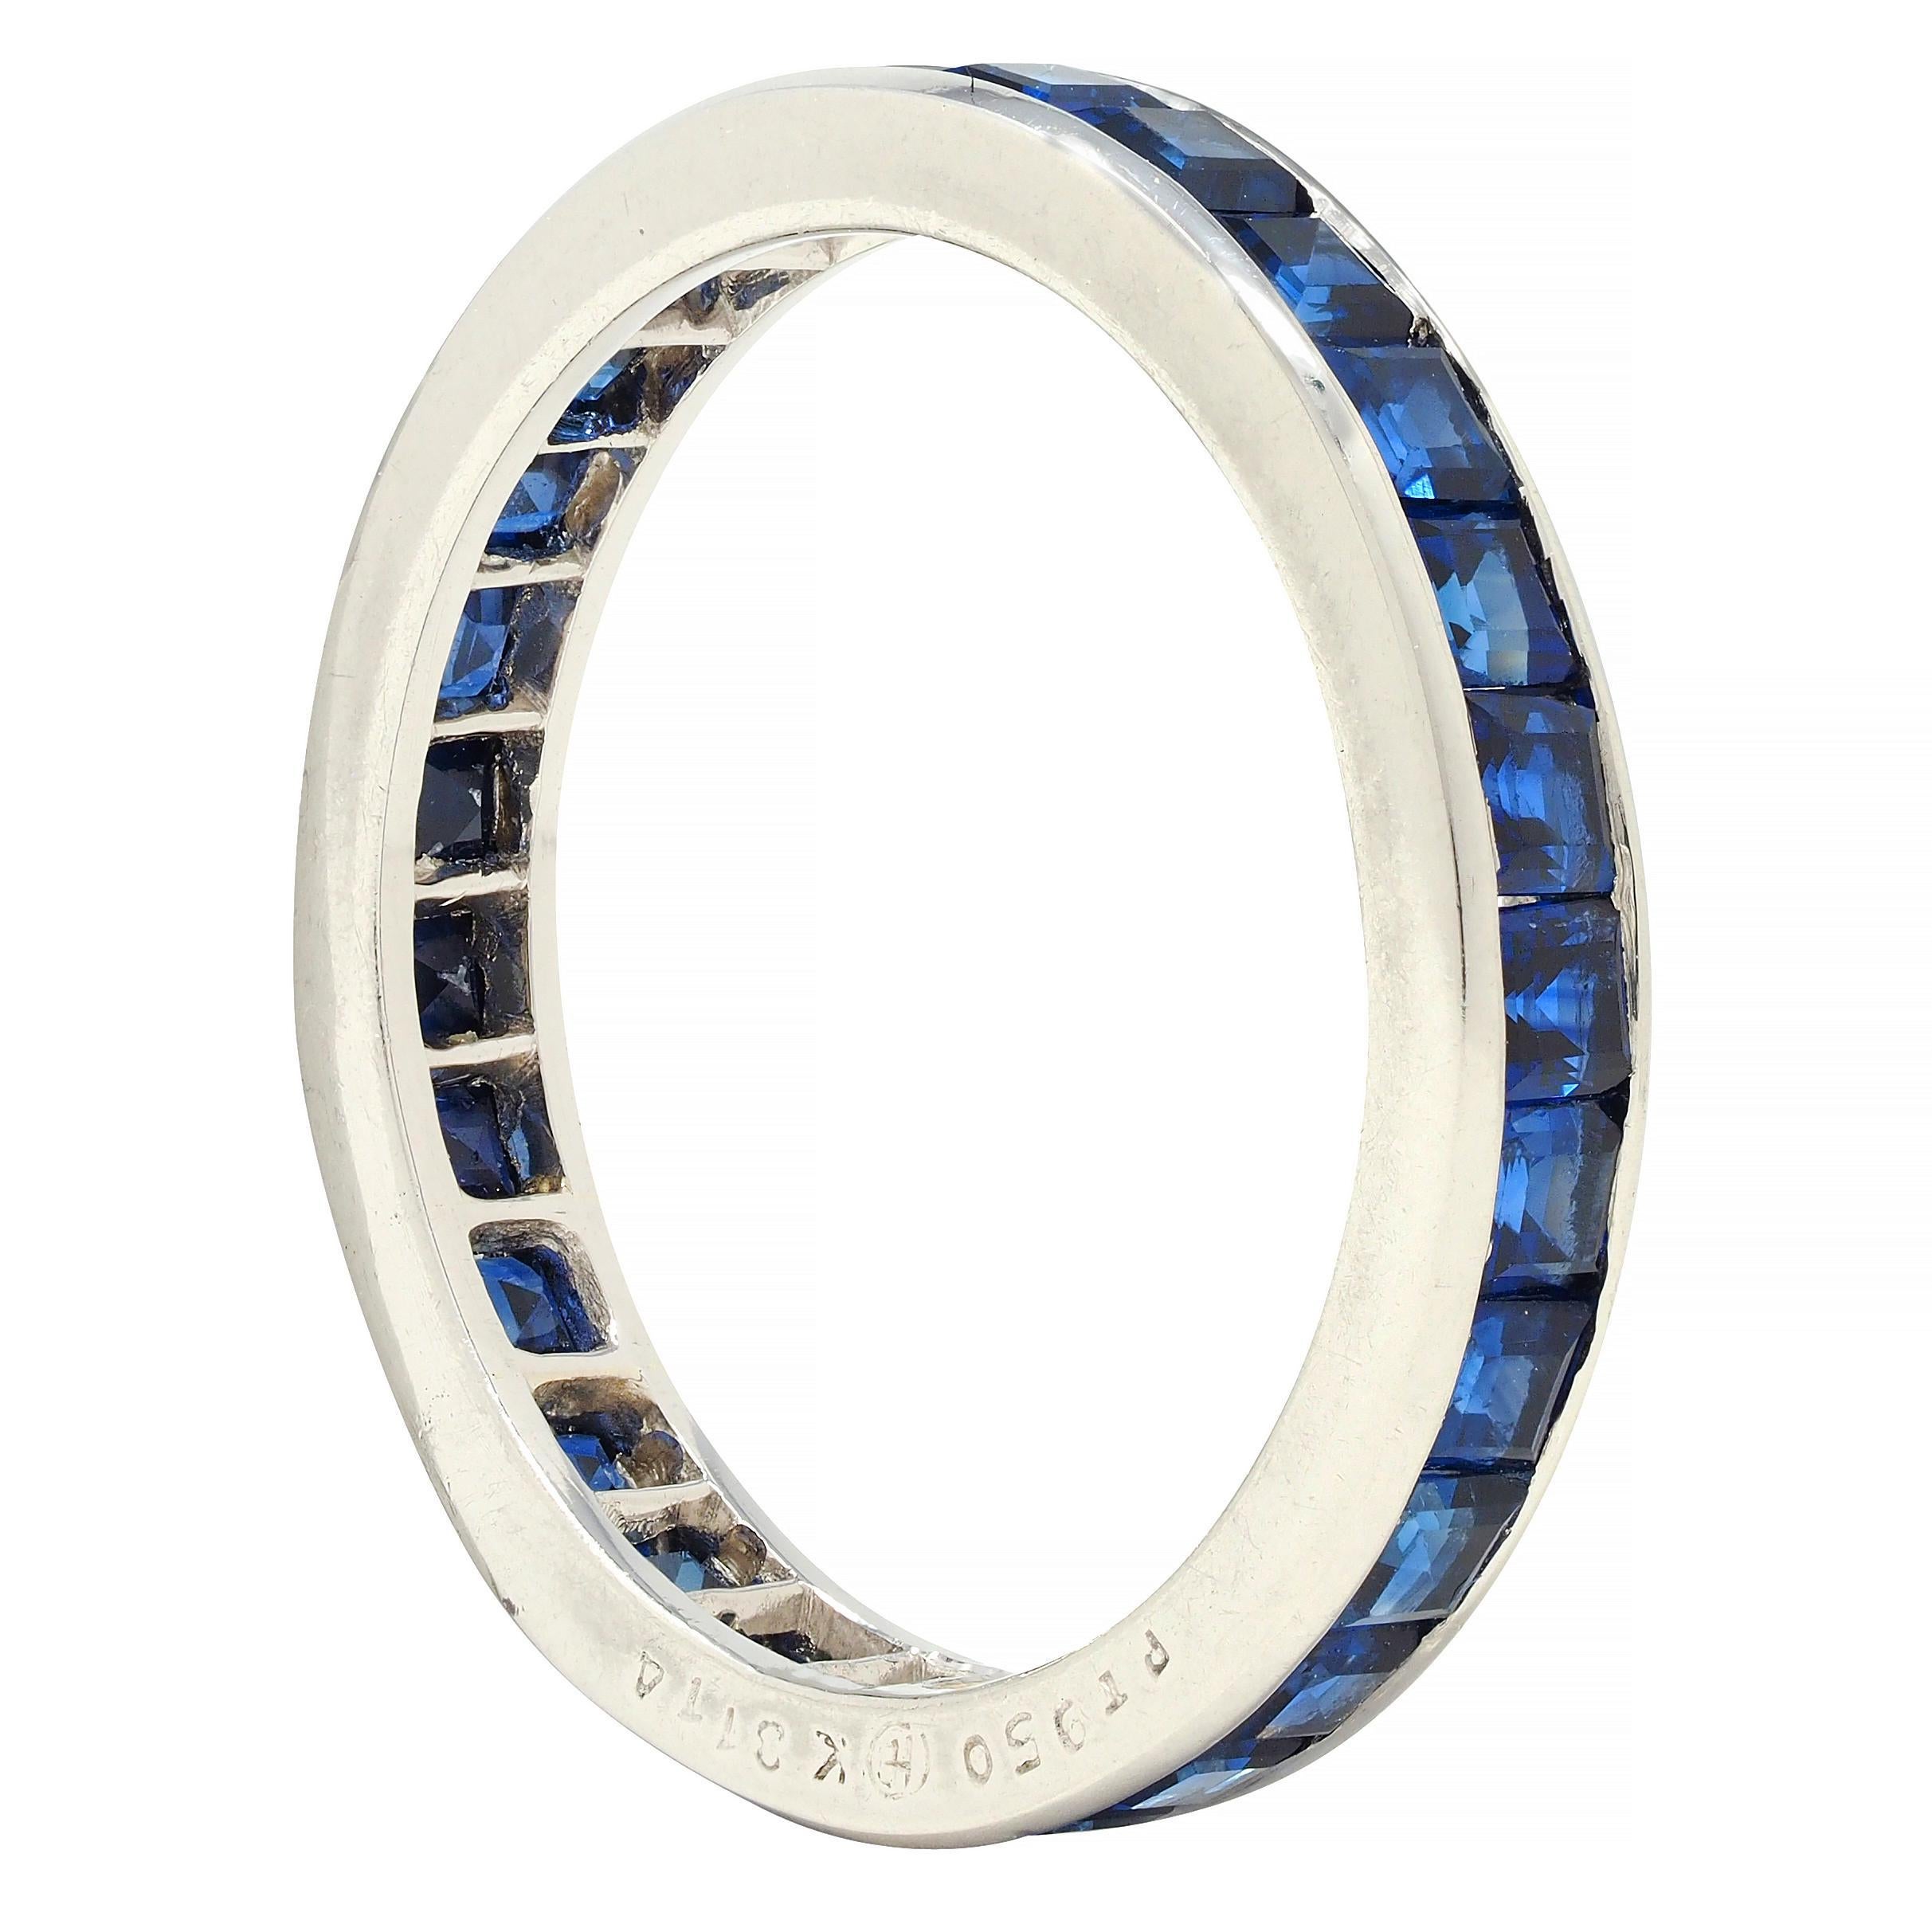 Comprised of step-cut sapphires channel set fully around 
Weighing approximately 1.89 carats total 
Transparent medium blue in color
Stamped for platinum
Numbered with maker's mark for Oscar Heyman
Circa: 1960s
Ring size: 5 3/4 and not